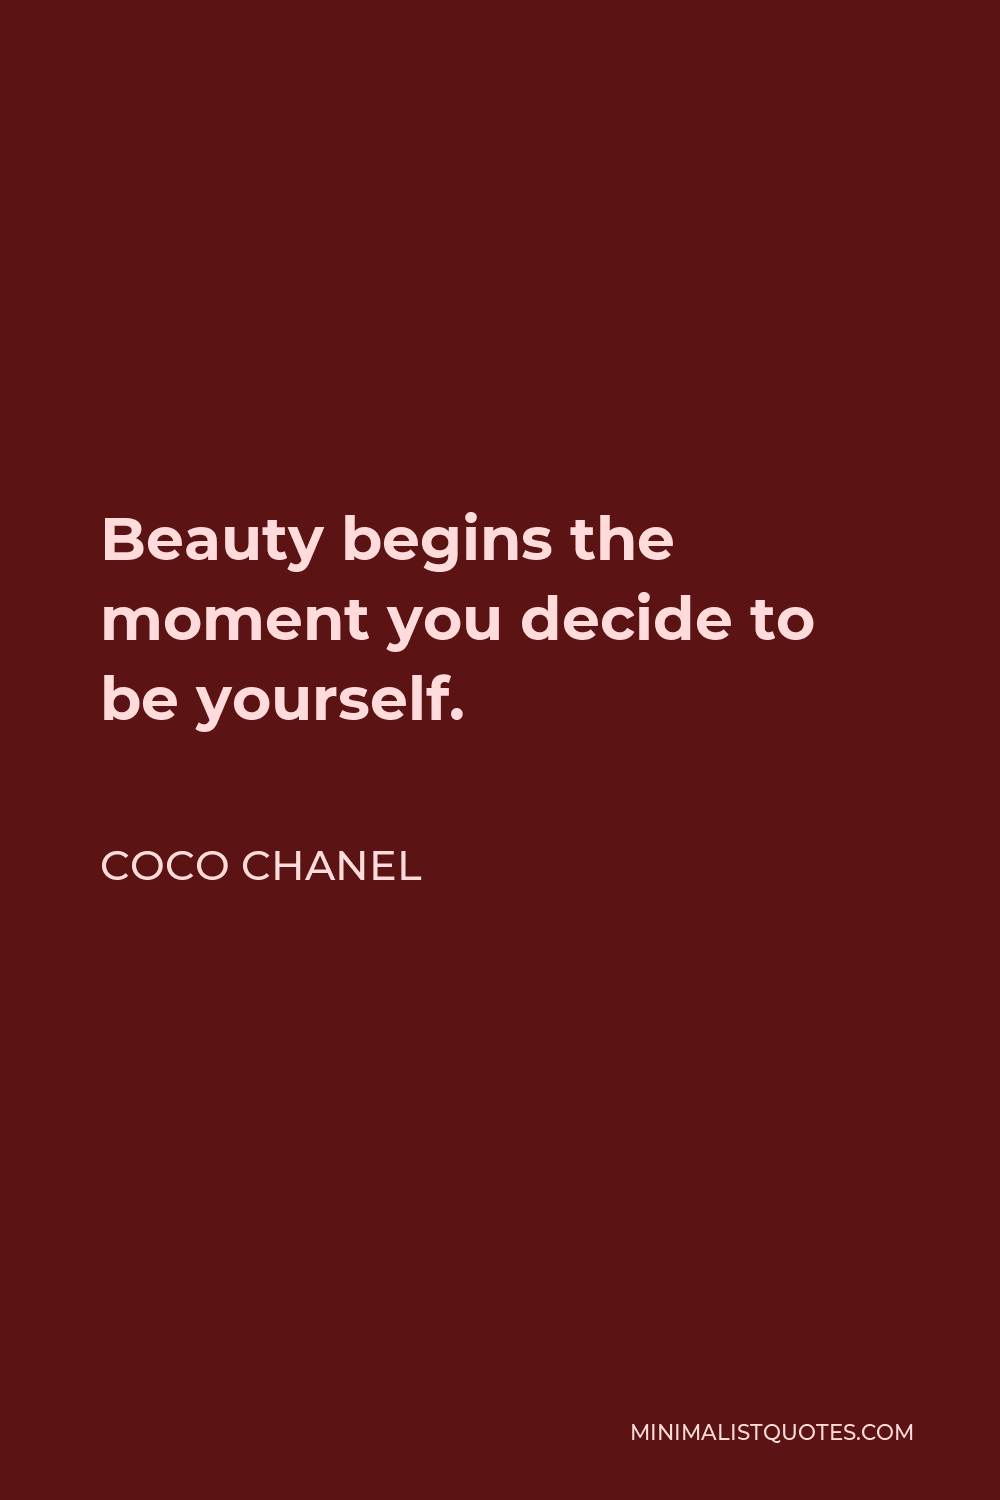 Coco Chanel Quote: Beauty begins the moment you decide to be yourself.